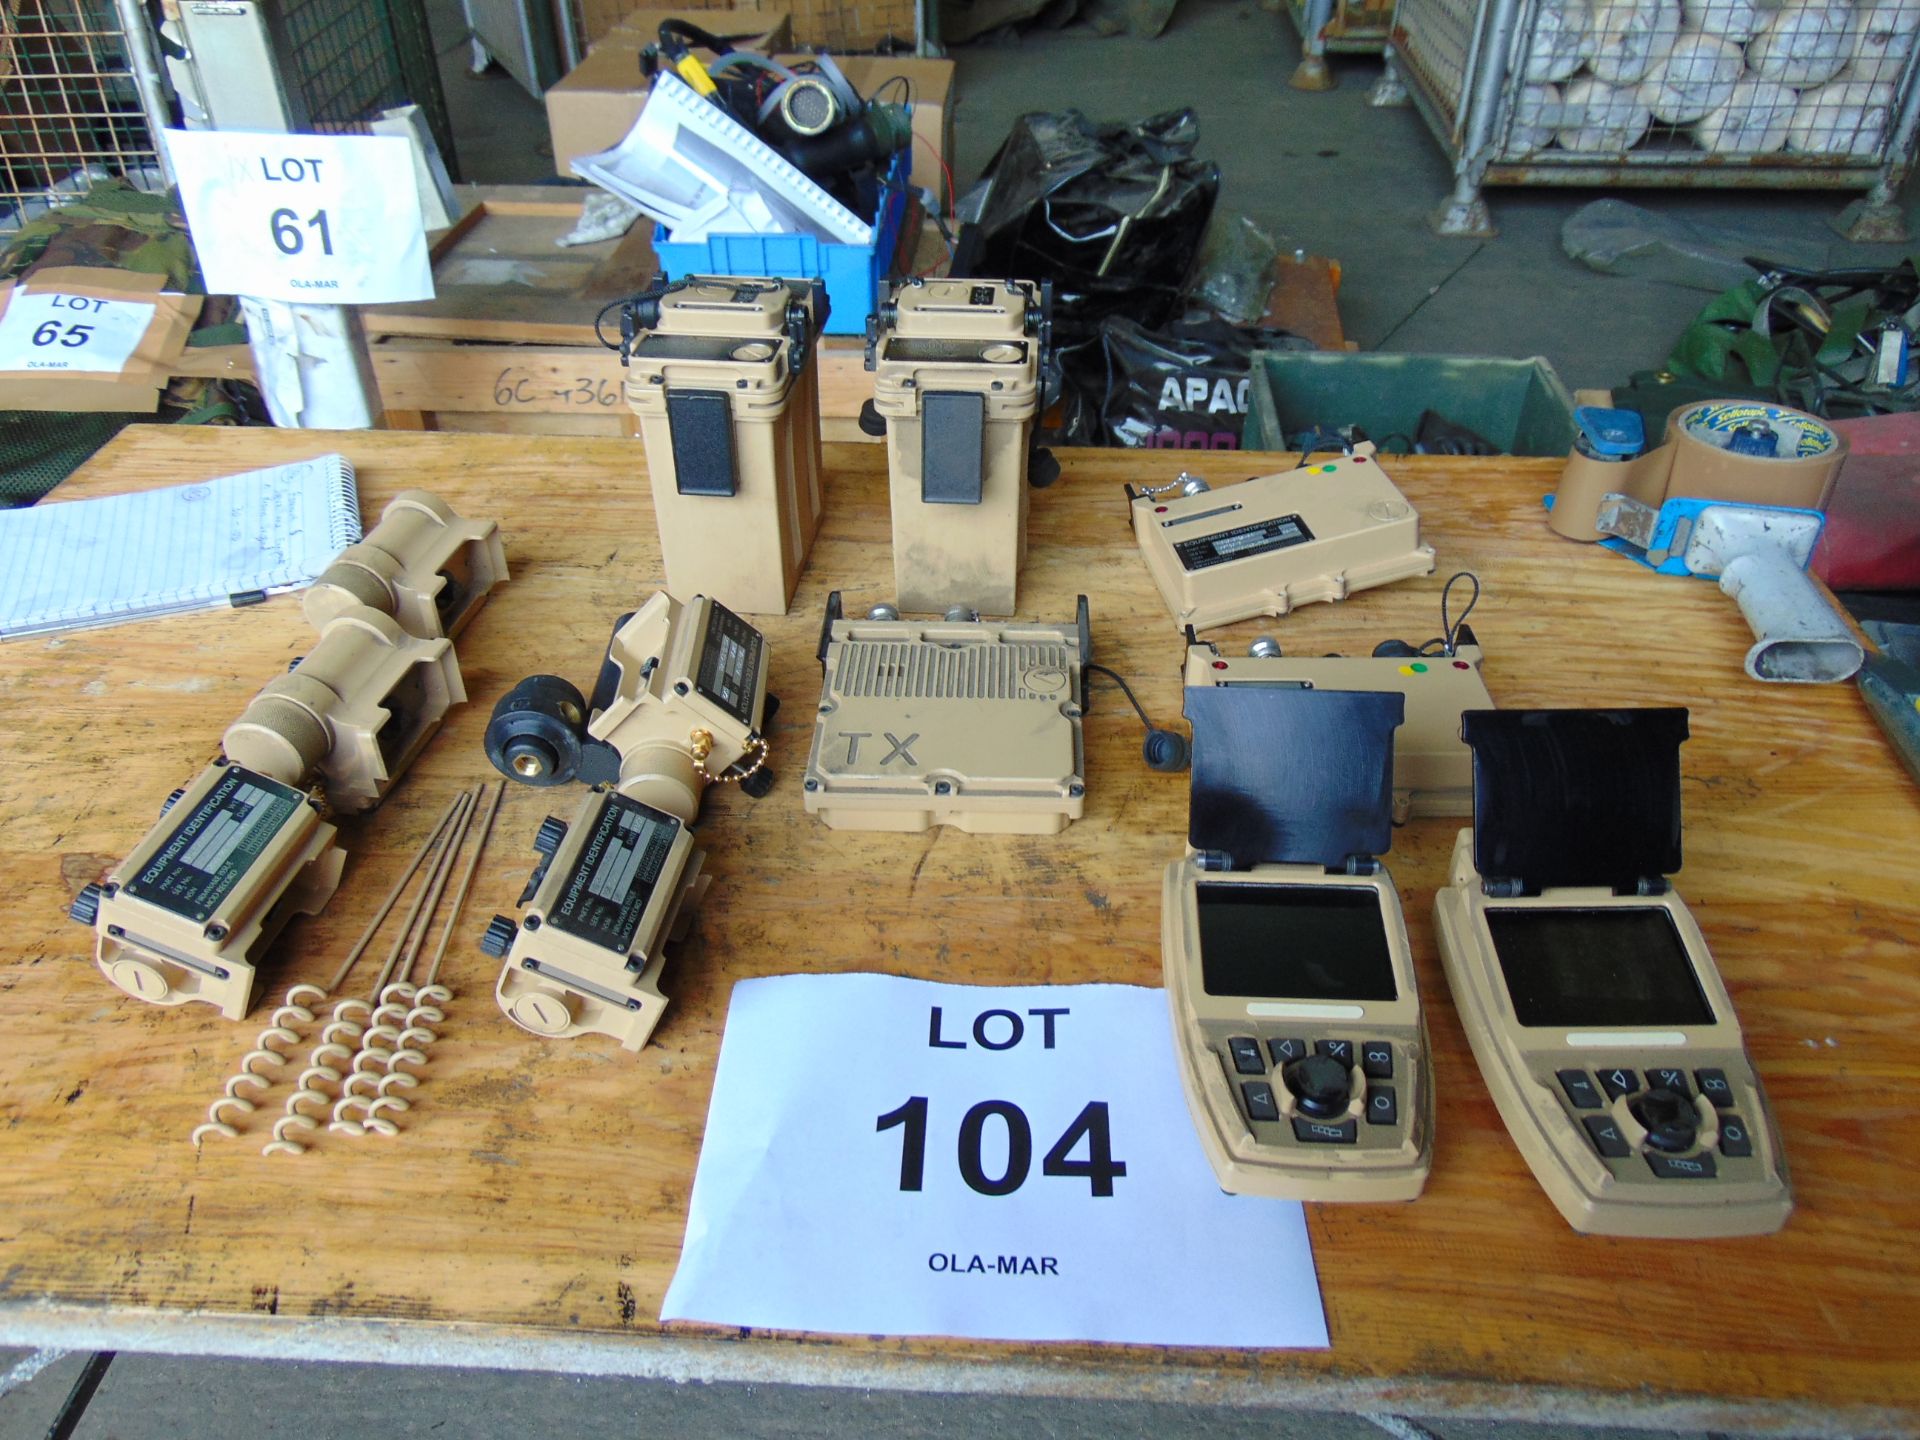 Firmware Surveillance Equipment as Shown Unissued - Image 8 of 8